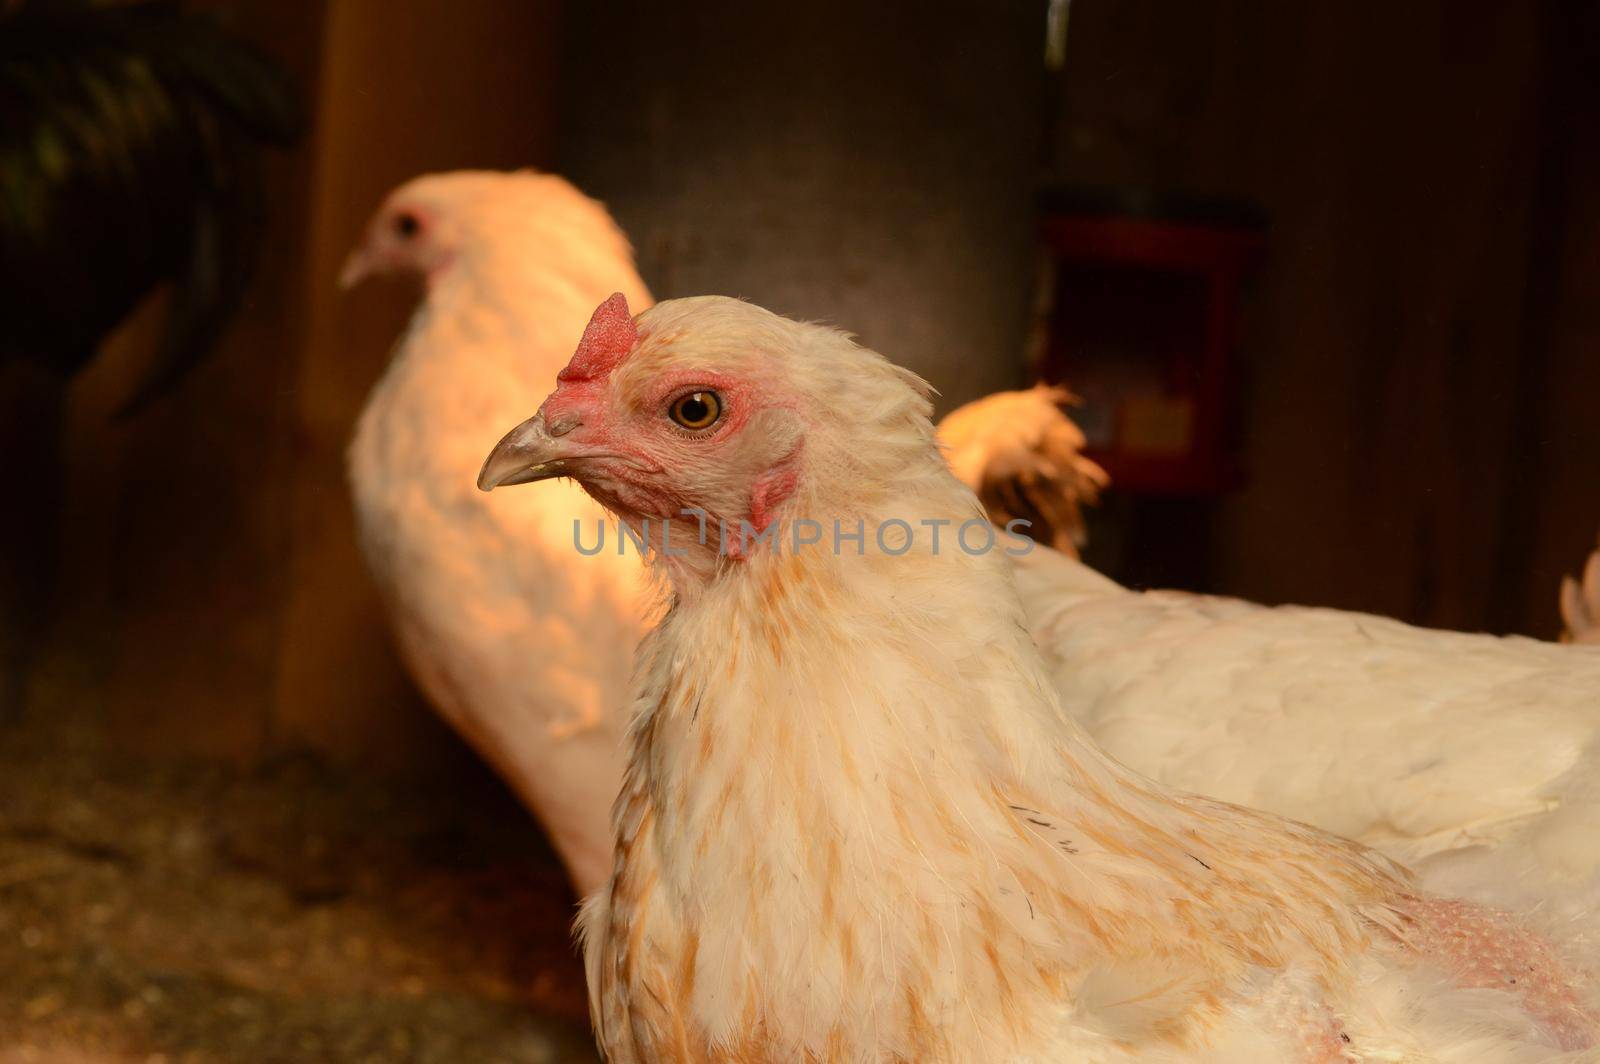 A closeup of the chickens inside their housing coop.